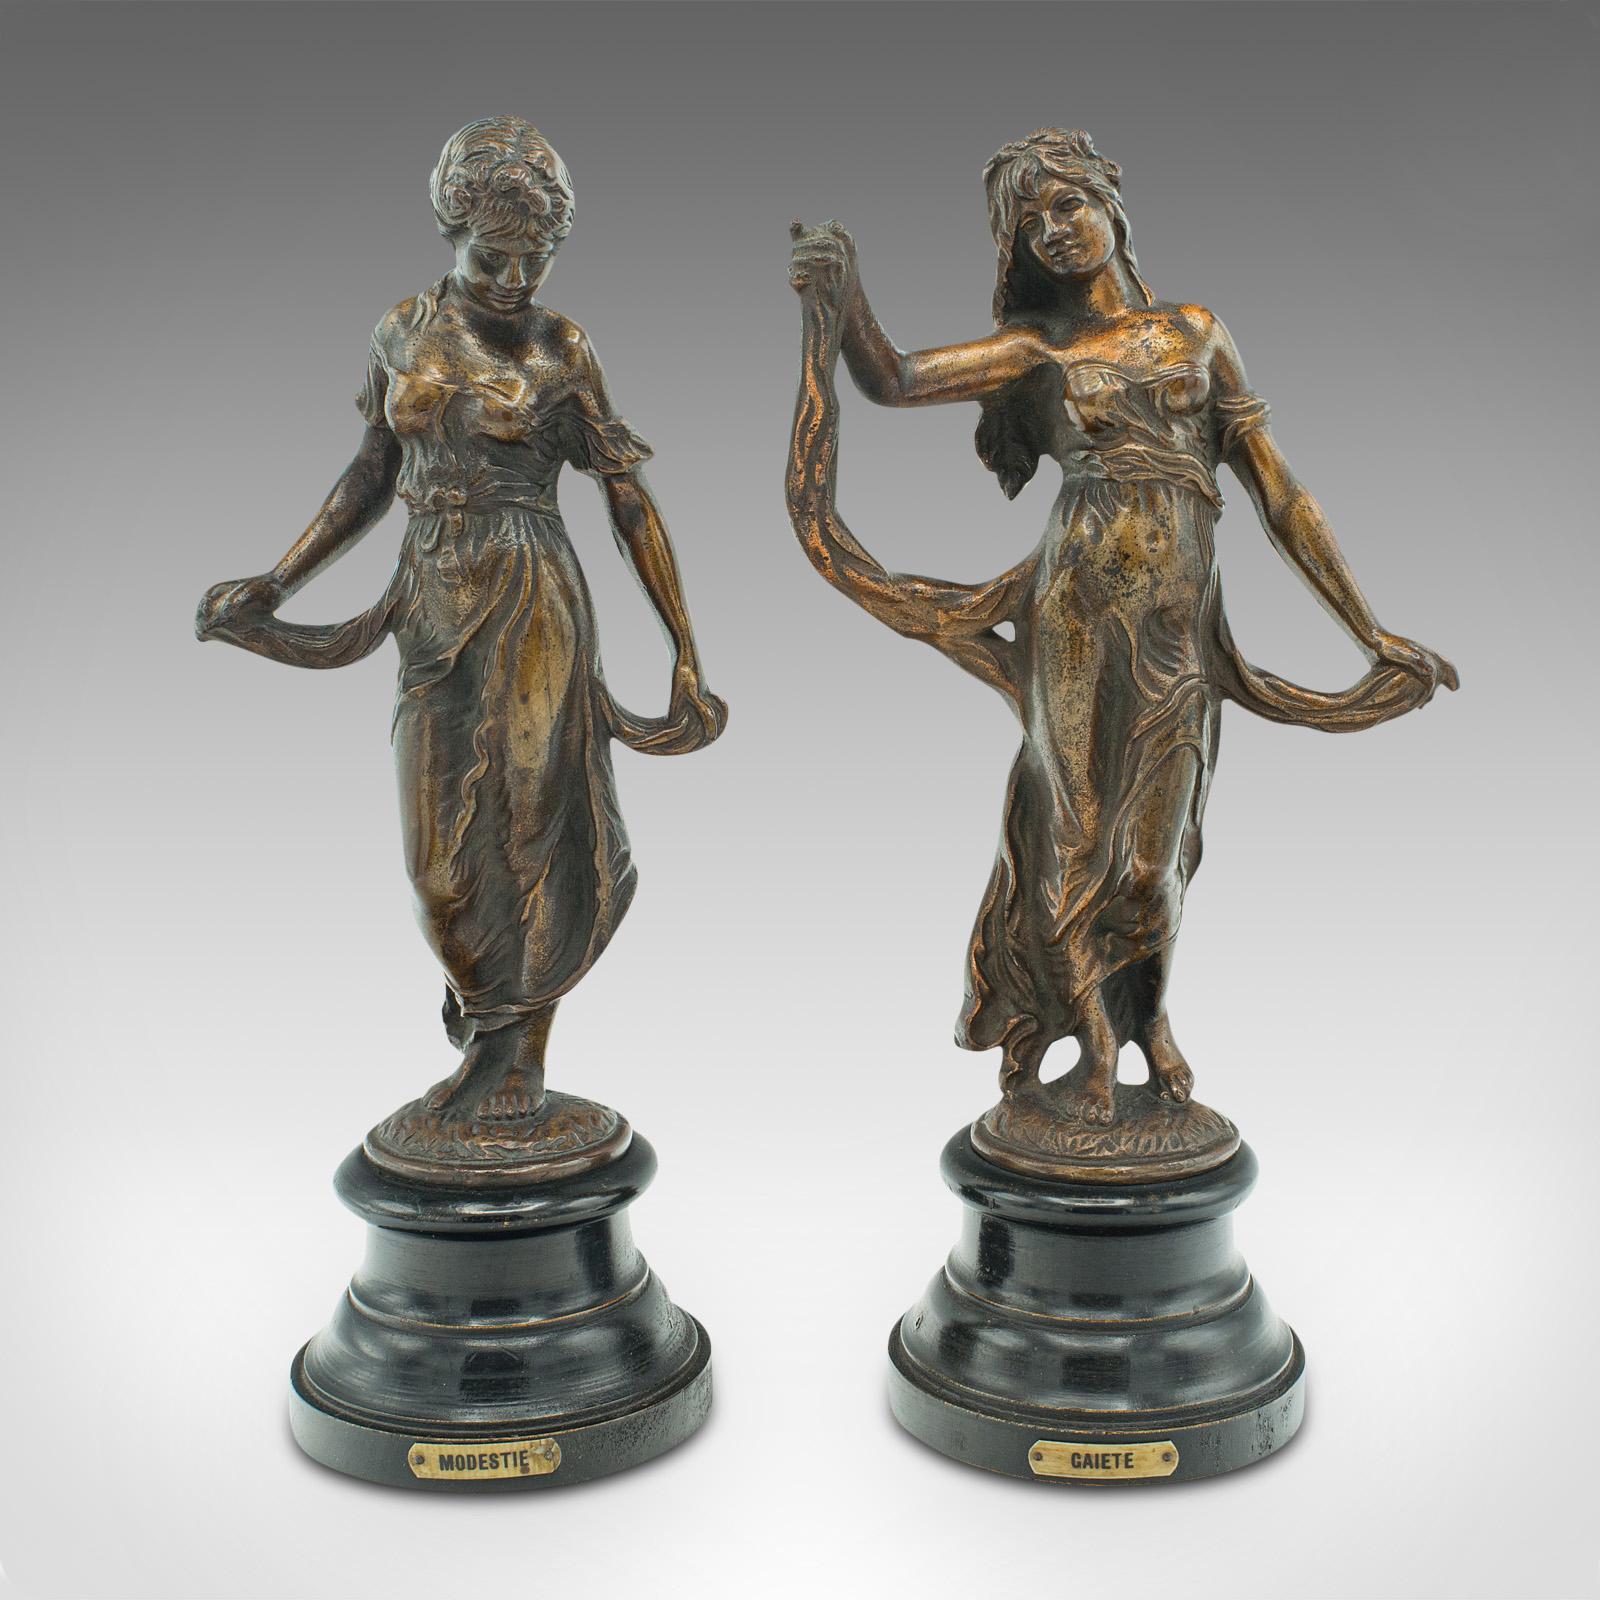 This is a pair of antique virtue figures. A French, bronze decorative female statue in Art Nouveau taste, dating to the late Victorian period, circa 1890.

Delightful elegance and appealing Art Nouveau motif
Displaying a desirable aged patina and in